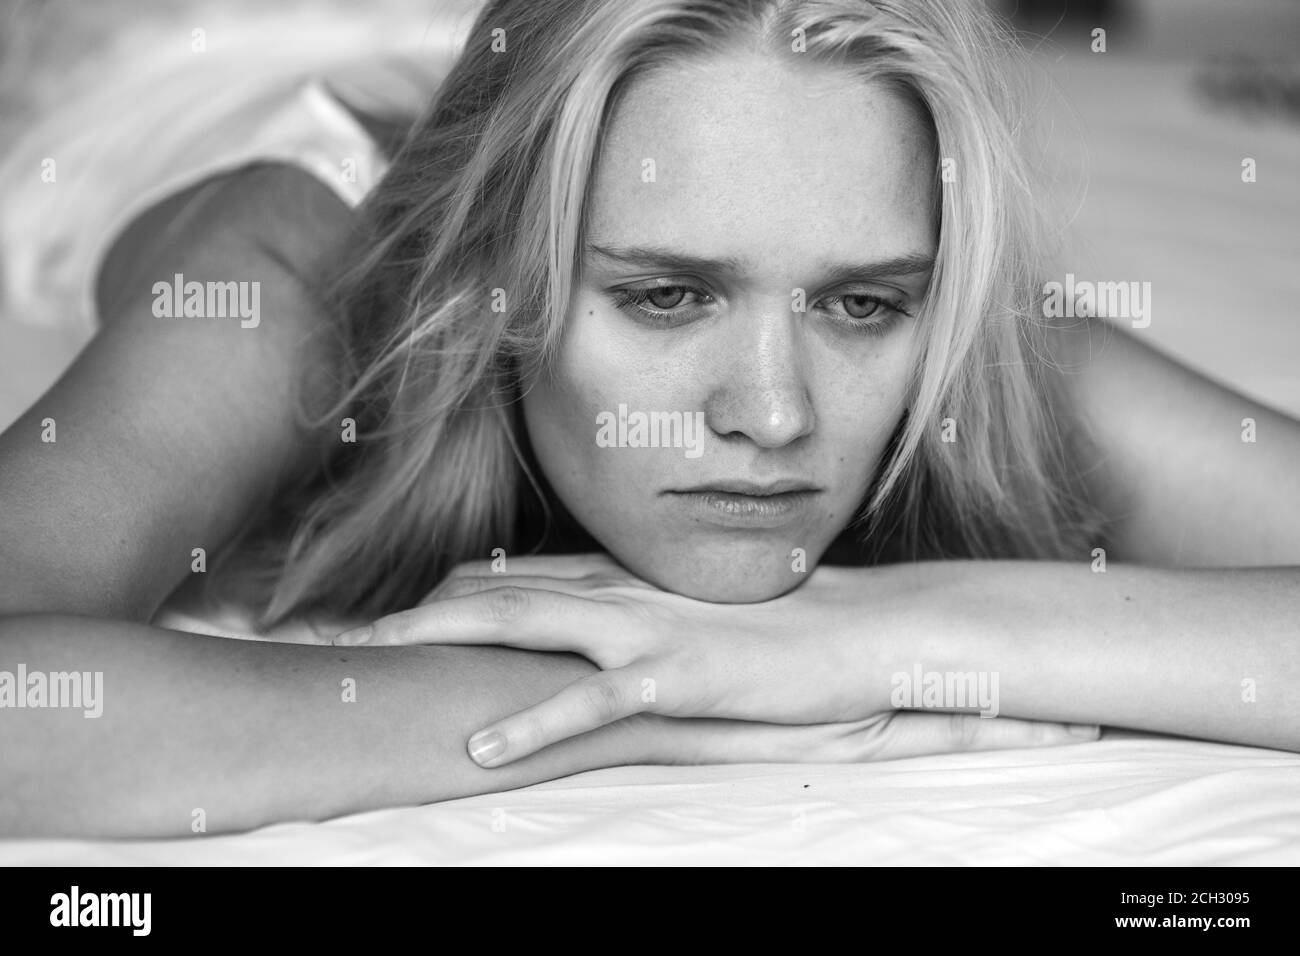 Depression and loneliness. Sad thinking young woman lying alone in bed. Black and white closeup. Stock Photo